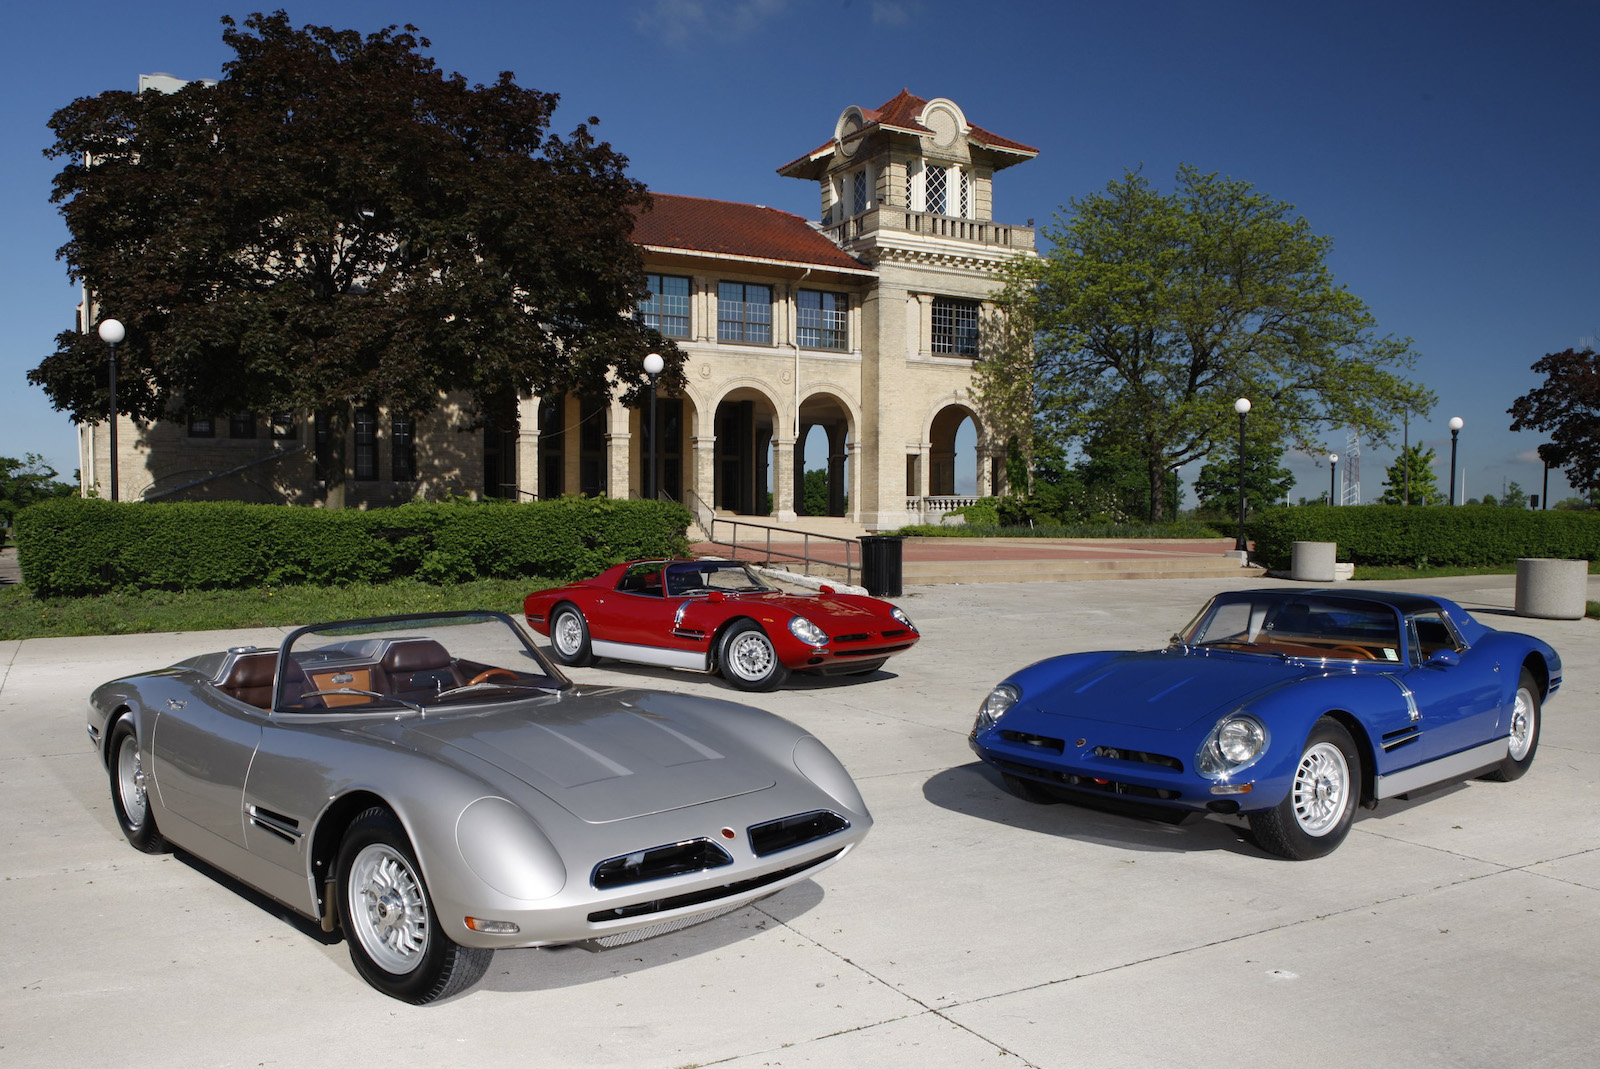 The Most Beautiful Three Cars in the World